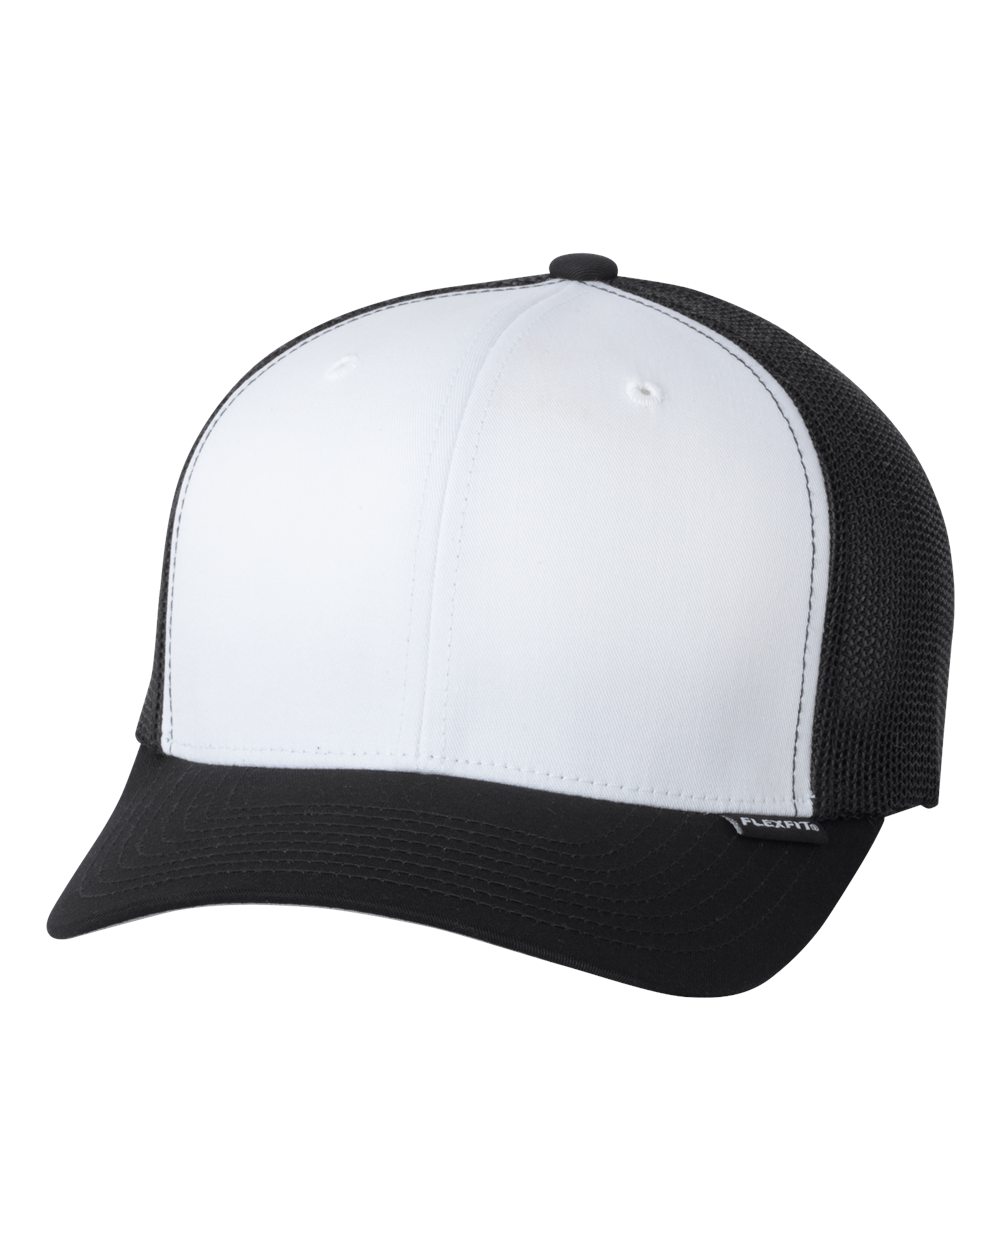 Best Photos of Black Hat Template - Blank Fitted Baseball Caps ...